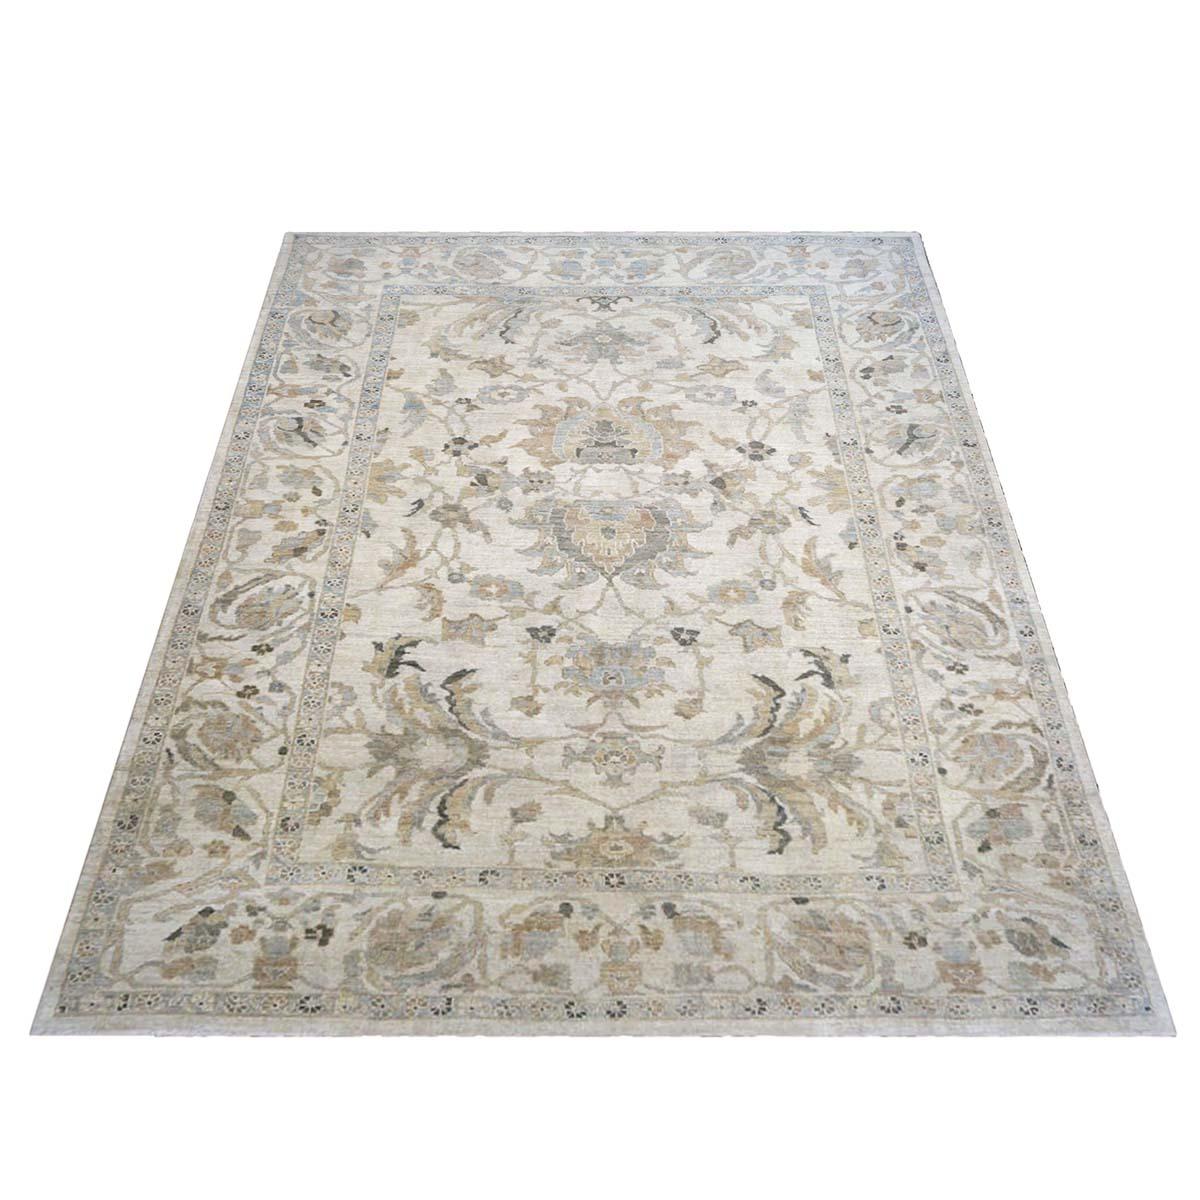 Ashly Fine rugs presents an antique recreation of an original Persian Sultanabad 9x11 Ivory, Light Blue, & Tan Handmade Area Rug. Part of our own previous production, this antique recreation was thought of and created in-house and 100% handmade in